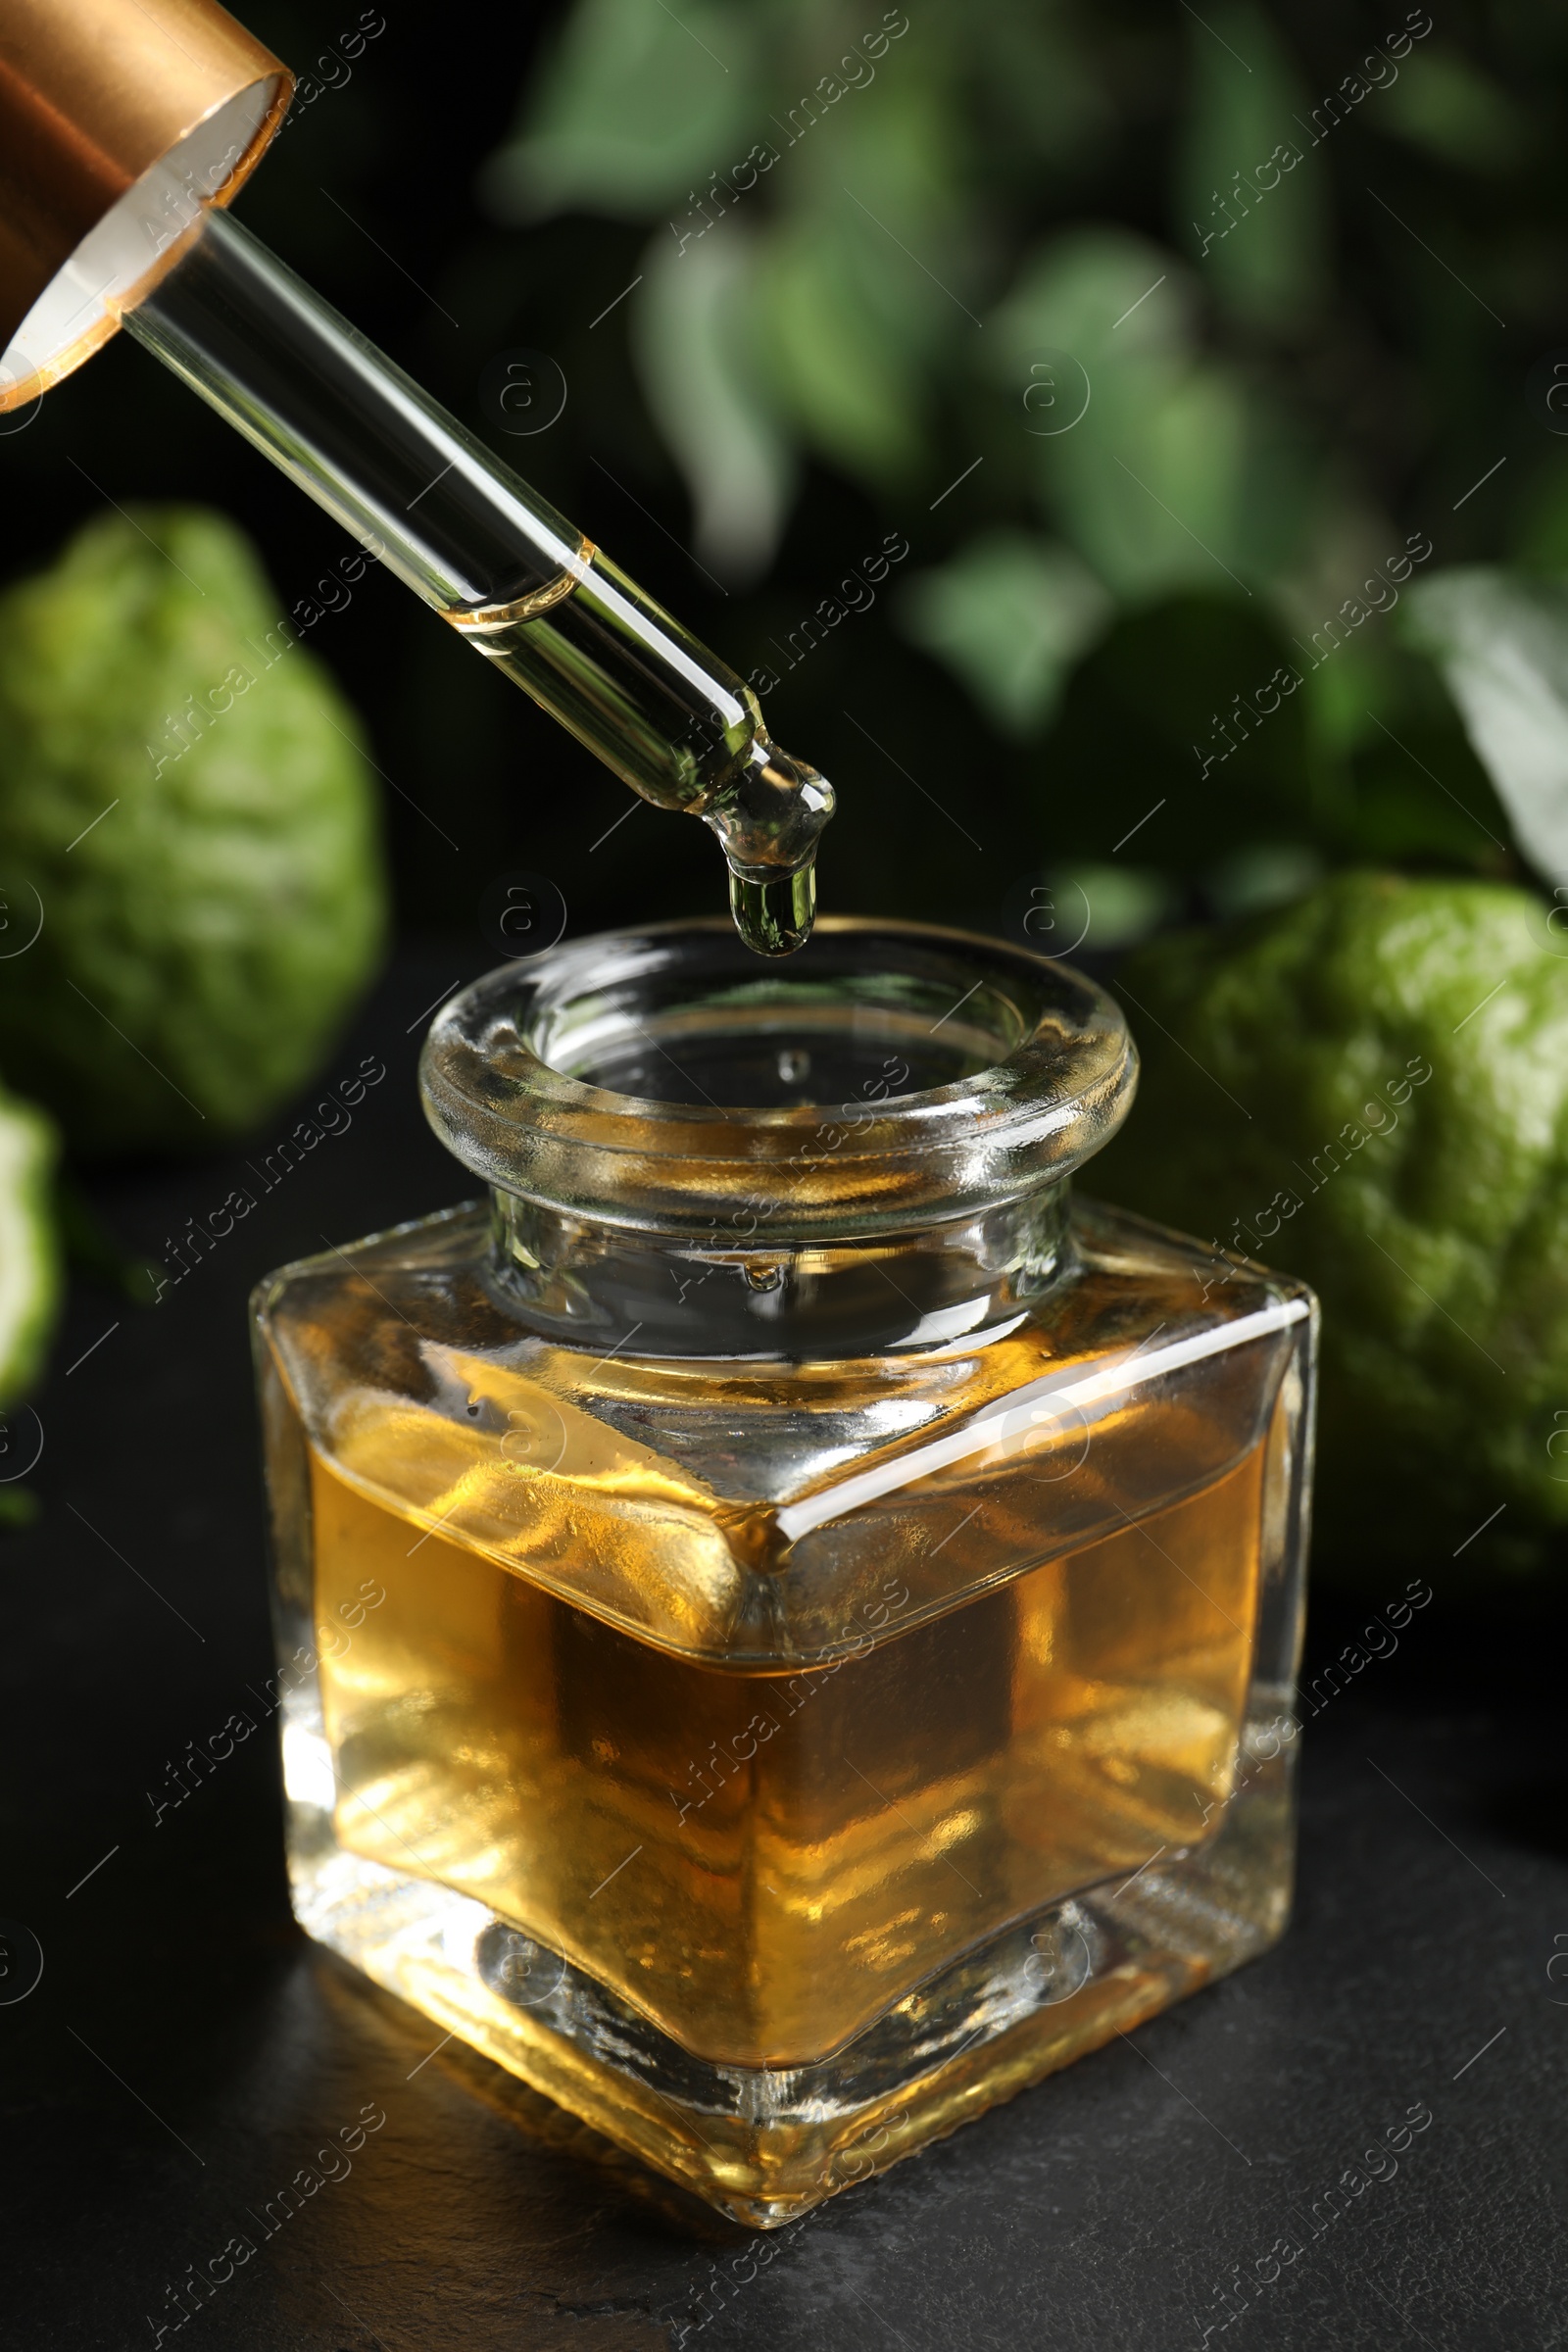 Photo of Dripping bergamot essential oil into glass bottle on black stone table